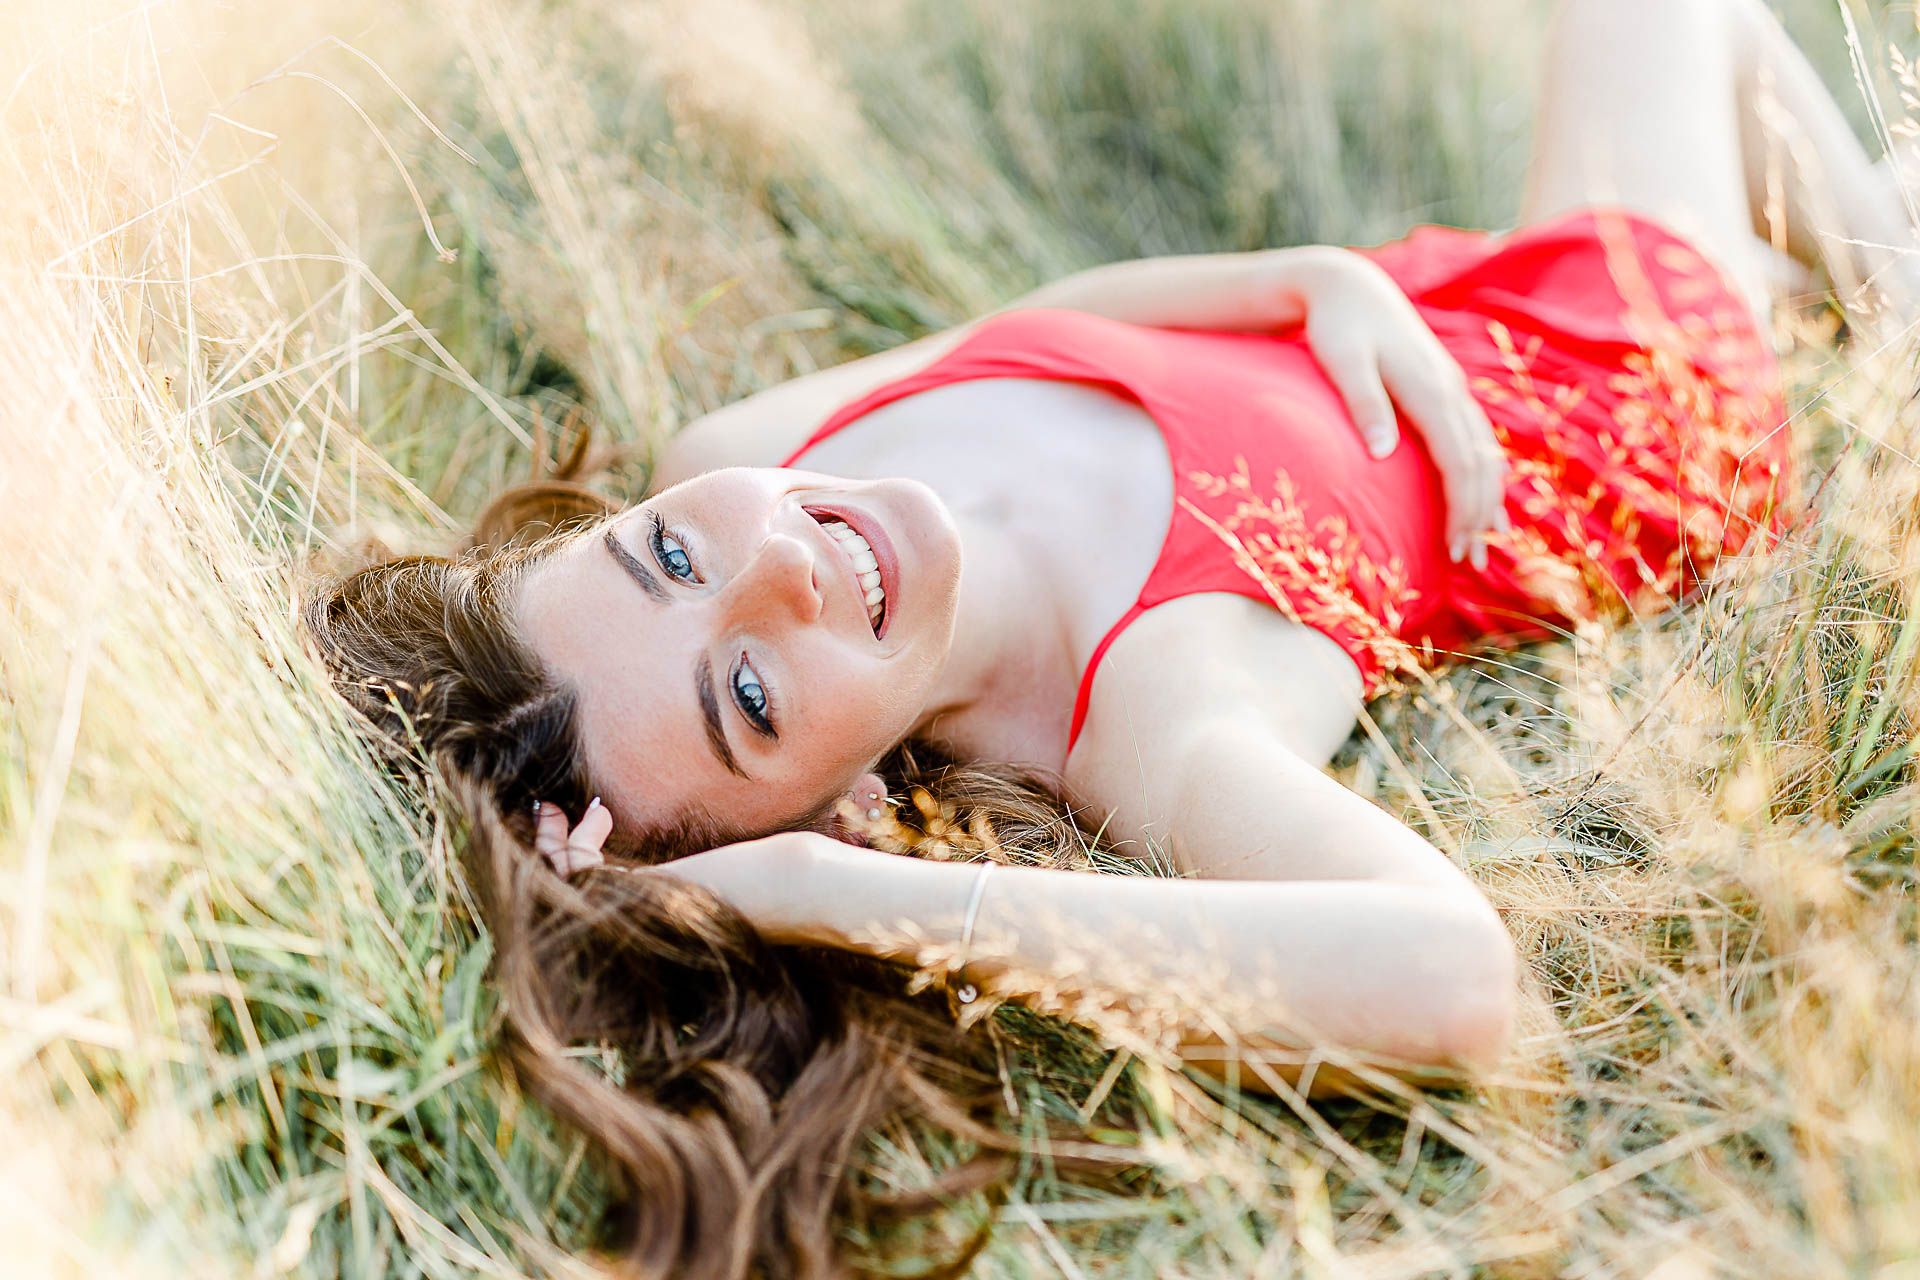 Photo by Duxbury senior portrait photographer Christina Runnals | High school senior girl wearing a red dress and laying in a field | Hot senior pictures